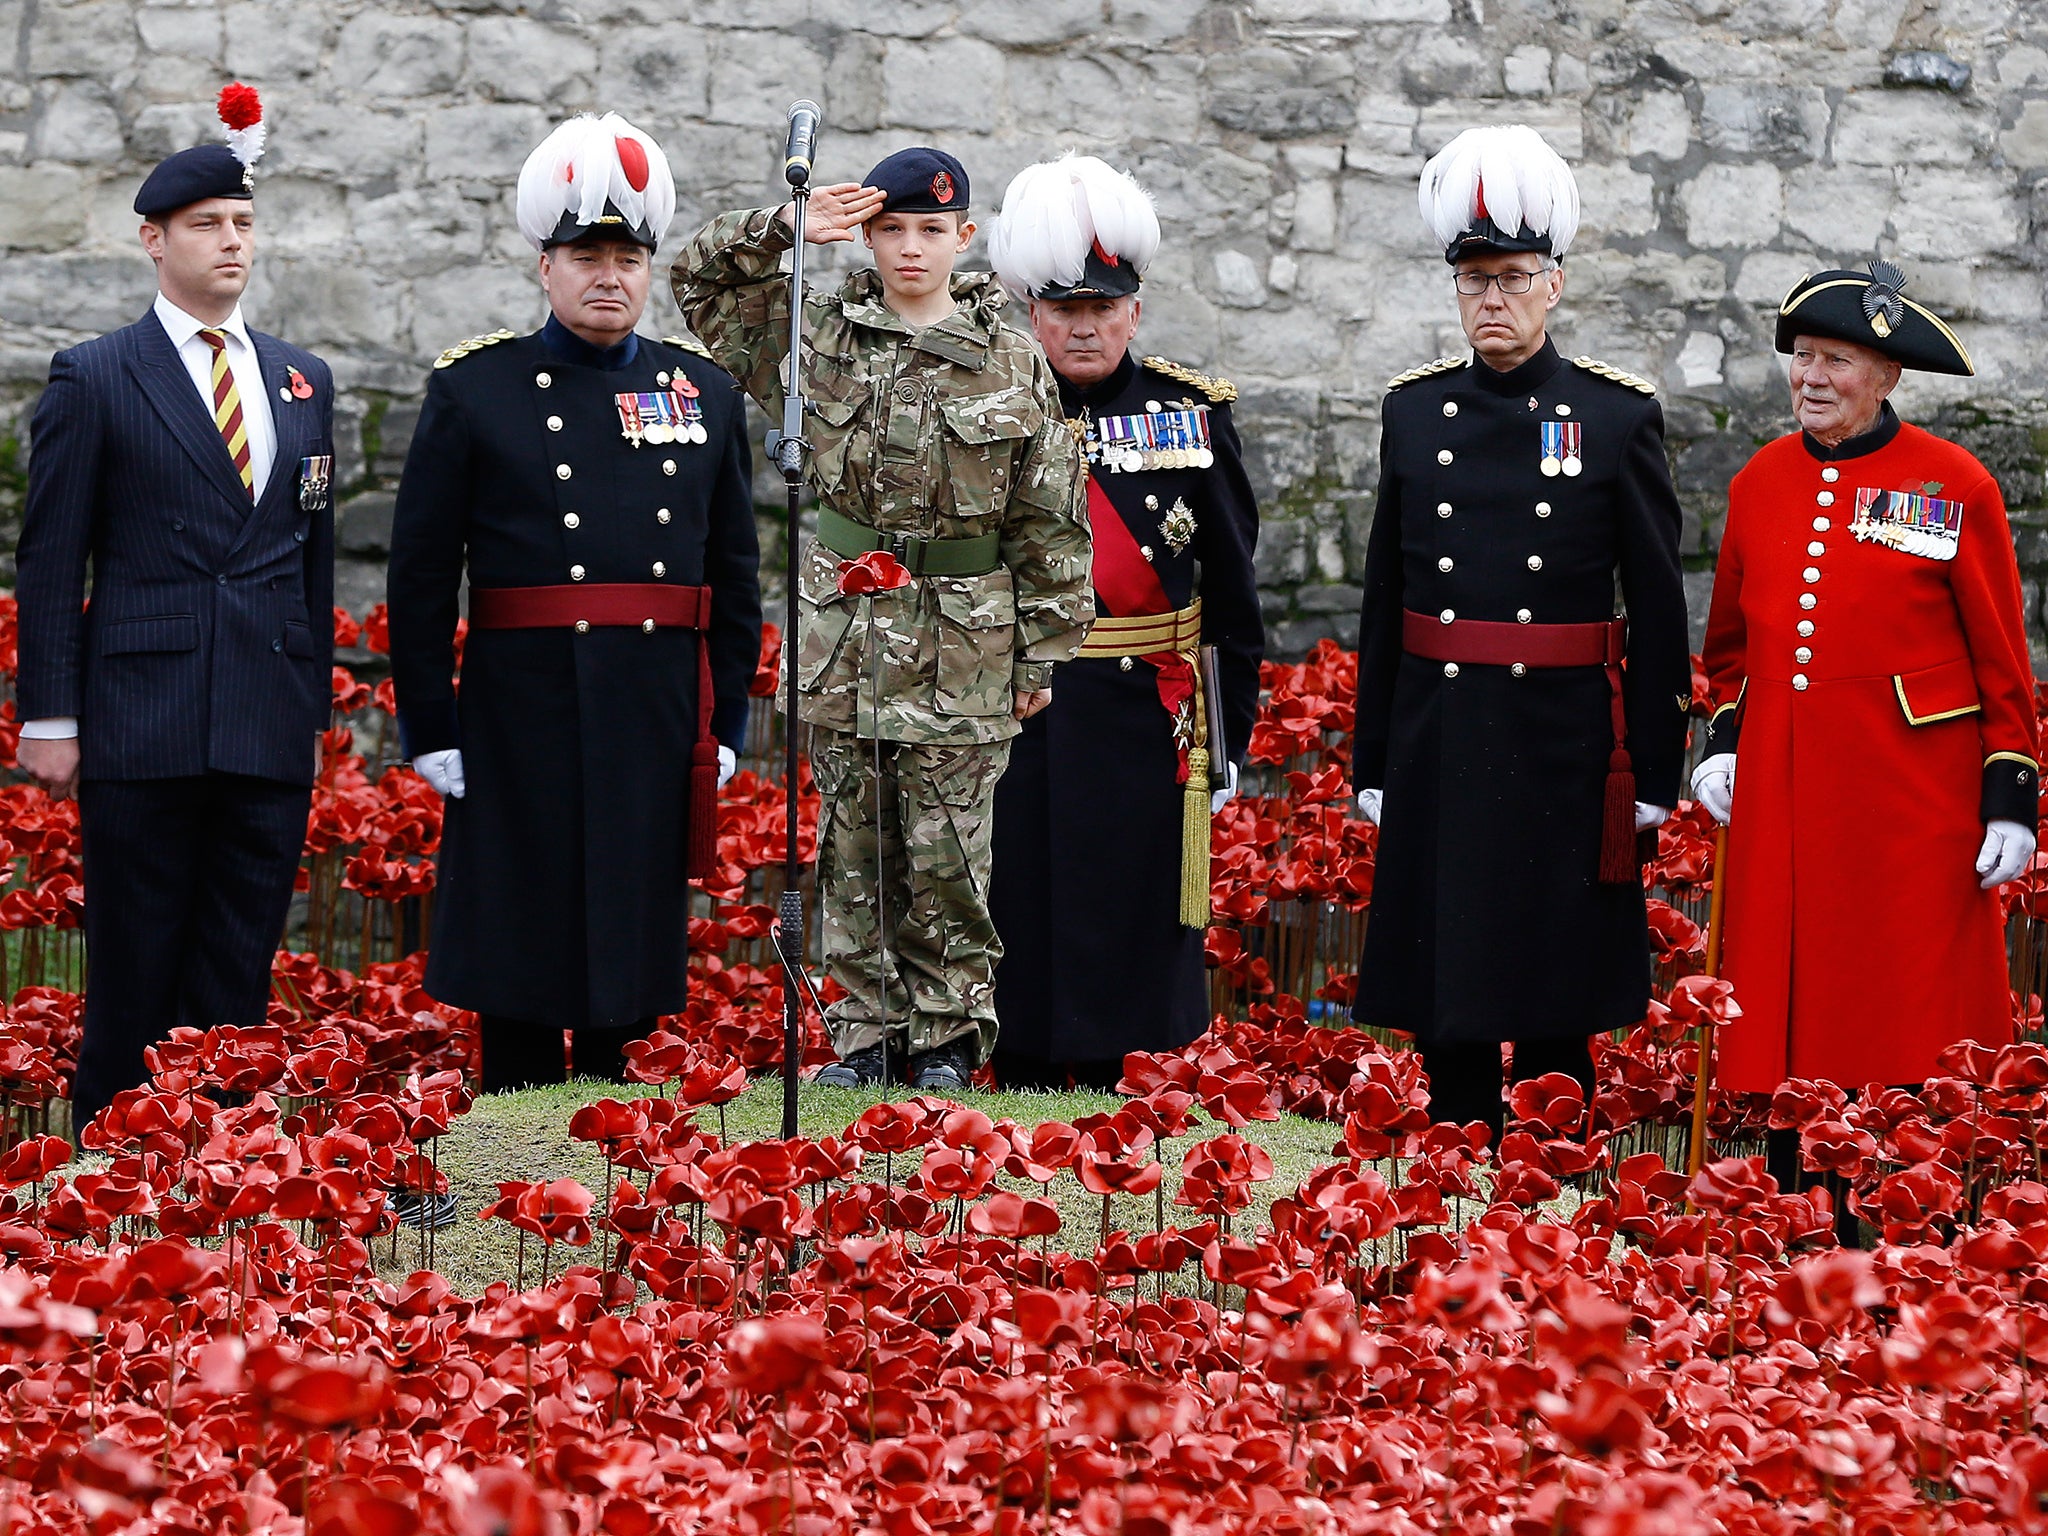 Cadet Harry Alexander Hayes salutes after he plants the last poppy during a remembrance day ceremony into the ceramic poppy art installation by artist Paul Cummins entitled 'Blood Swept Lands and Seas of Red' in the dry moat of the Tower of London